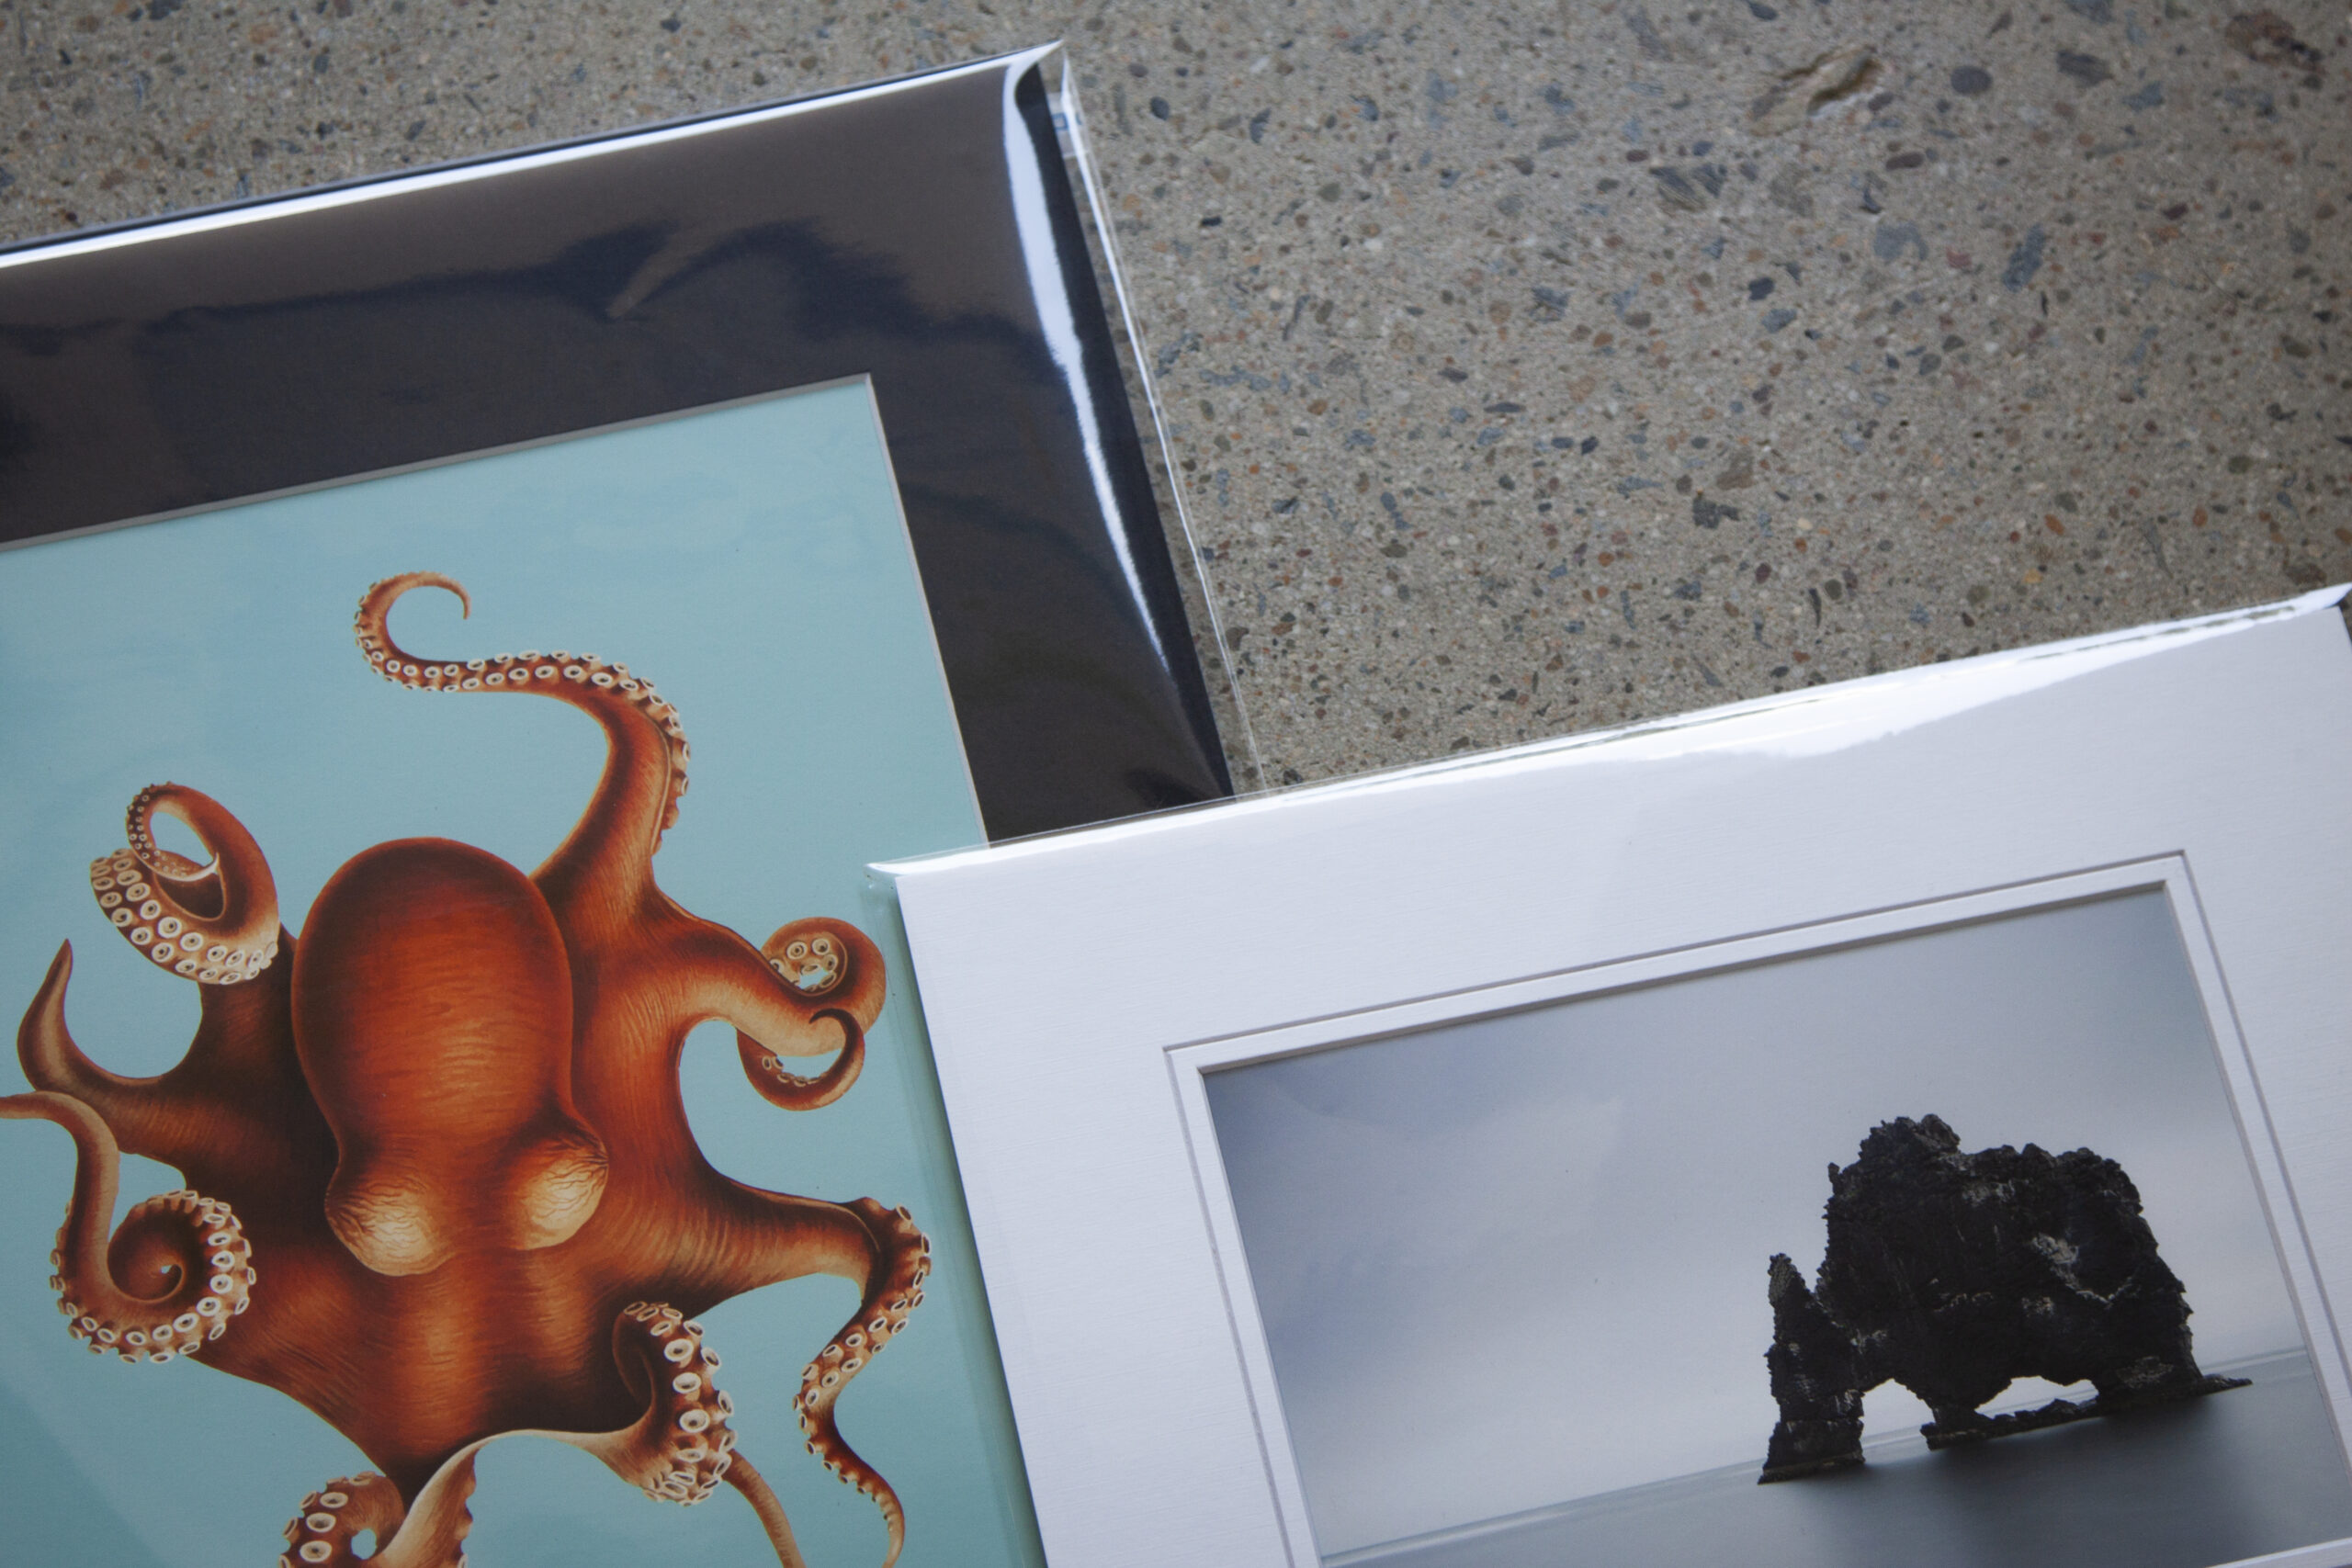 Photos printed and mounted into slip-in mounts and clear plastic sleeves